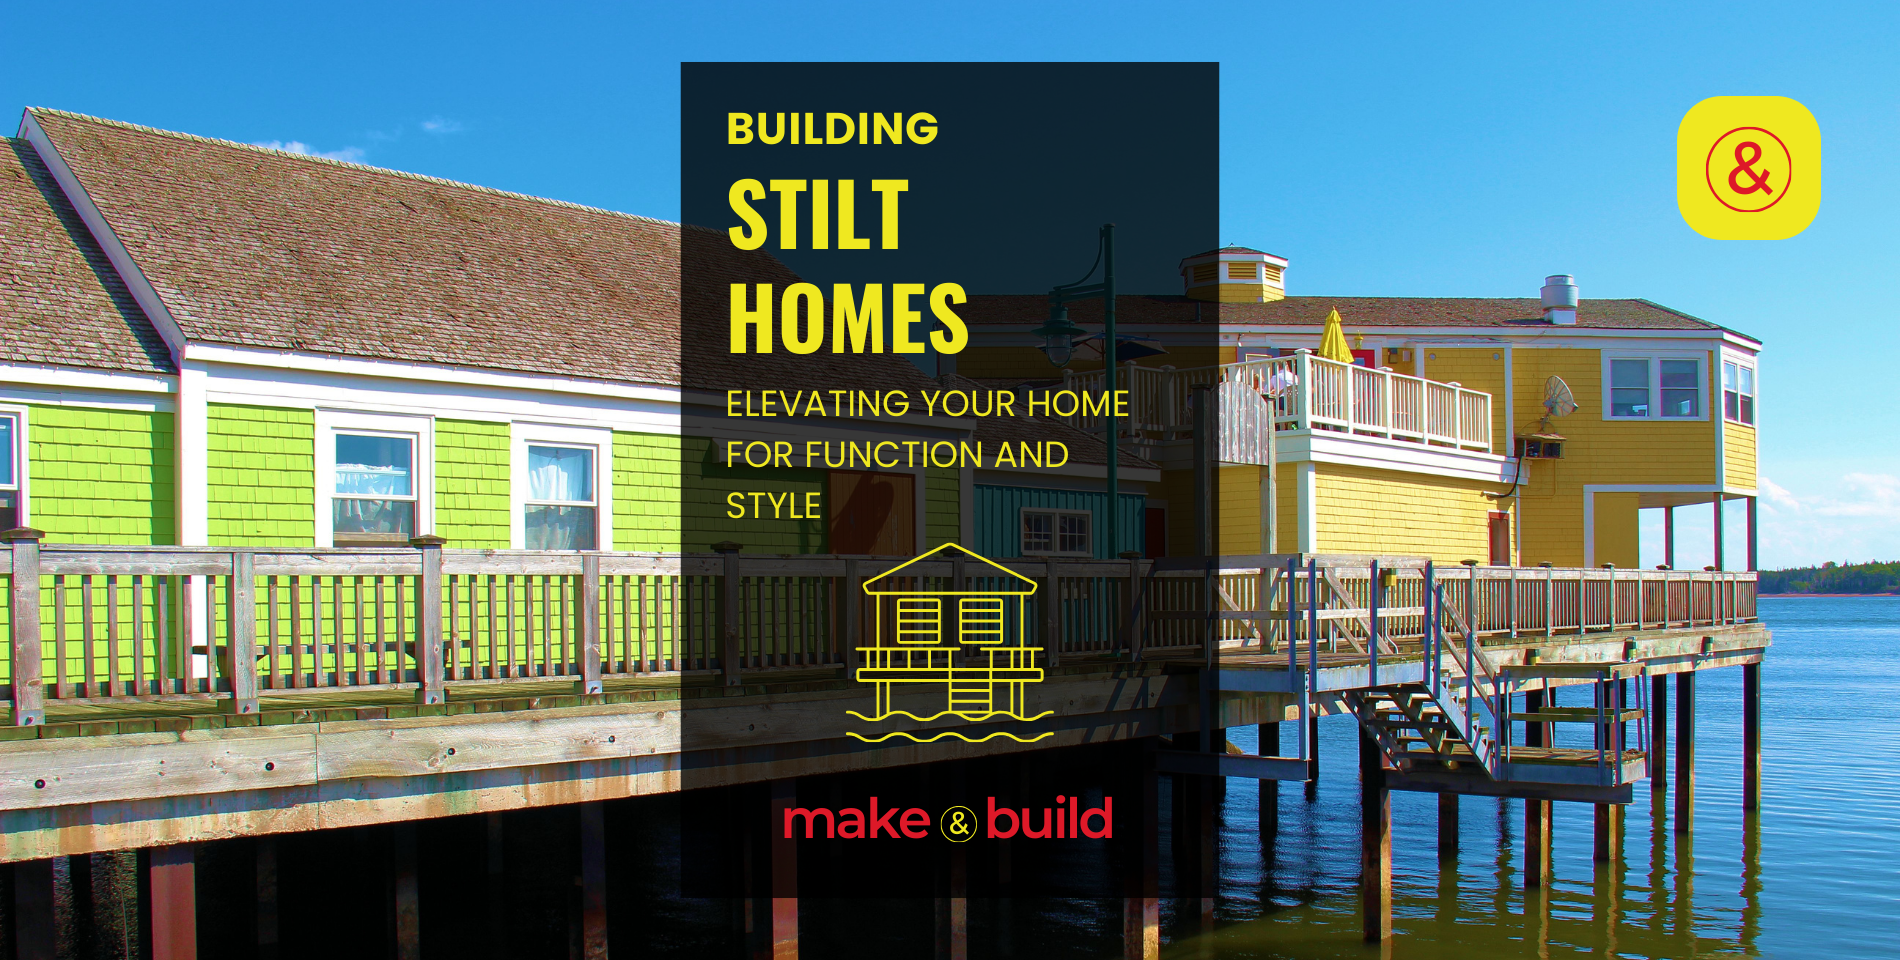 How to Build a House on Stilts: Elevating Your Home for Function and Style